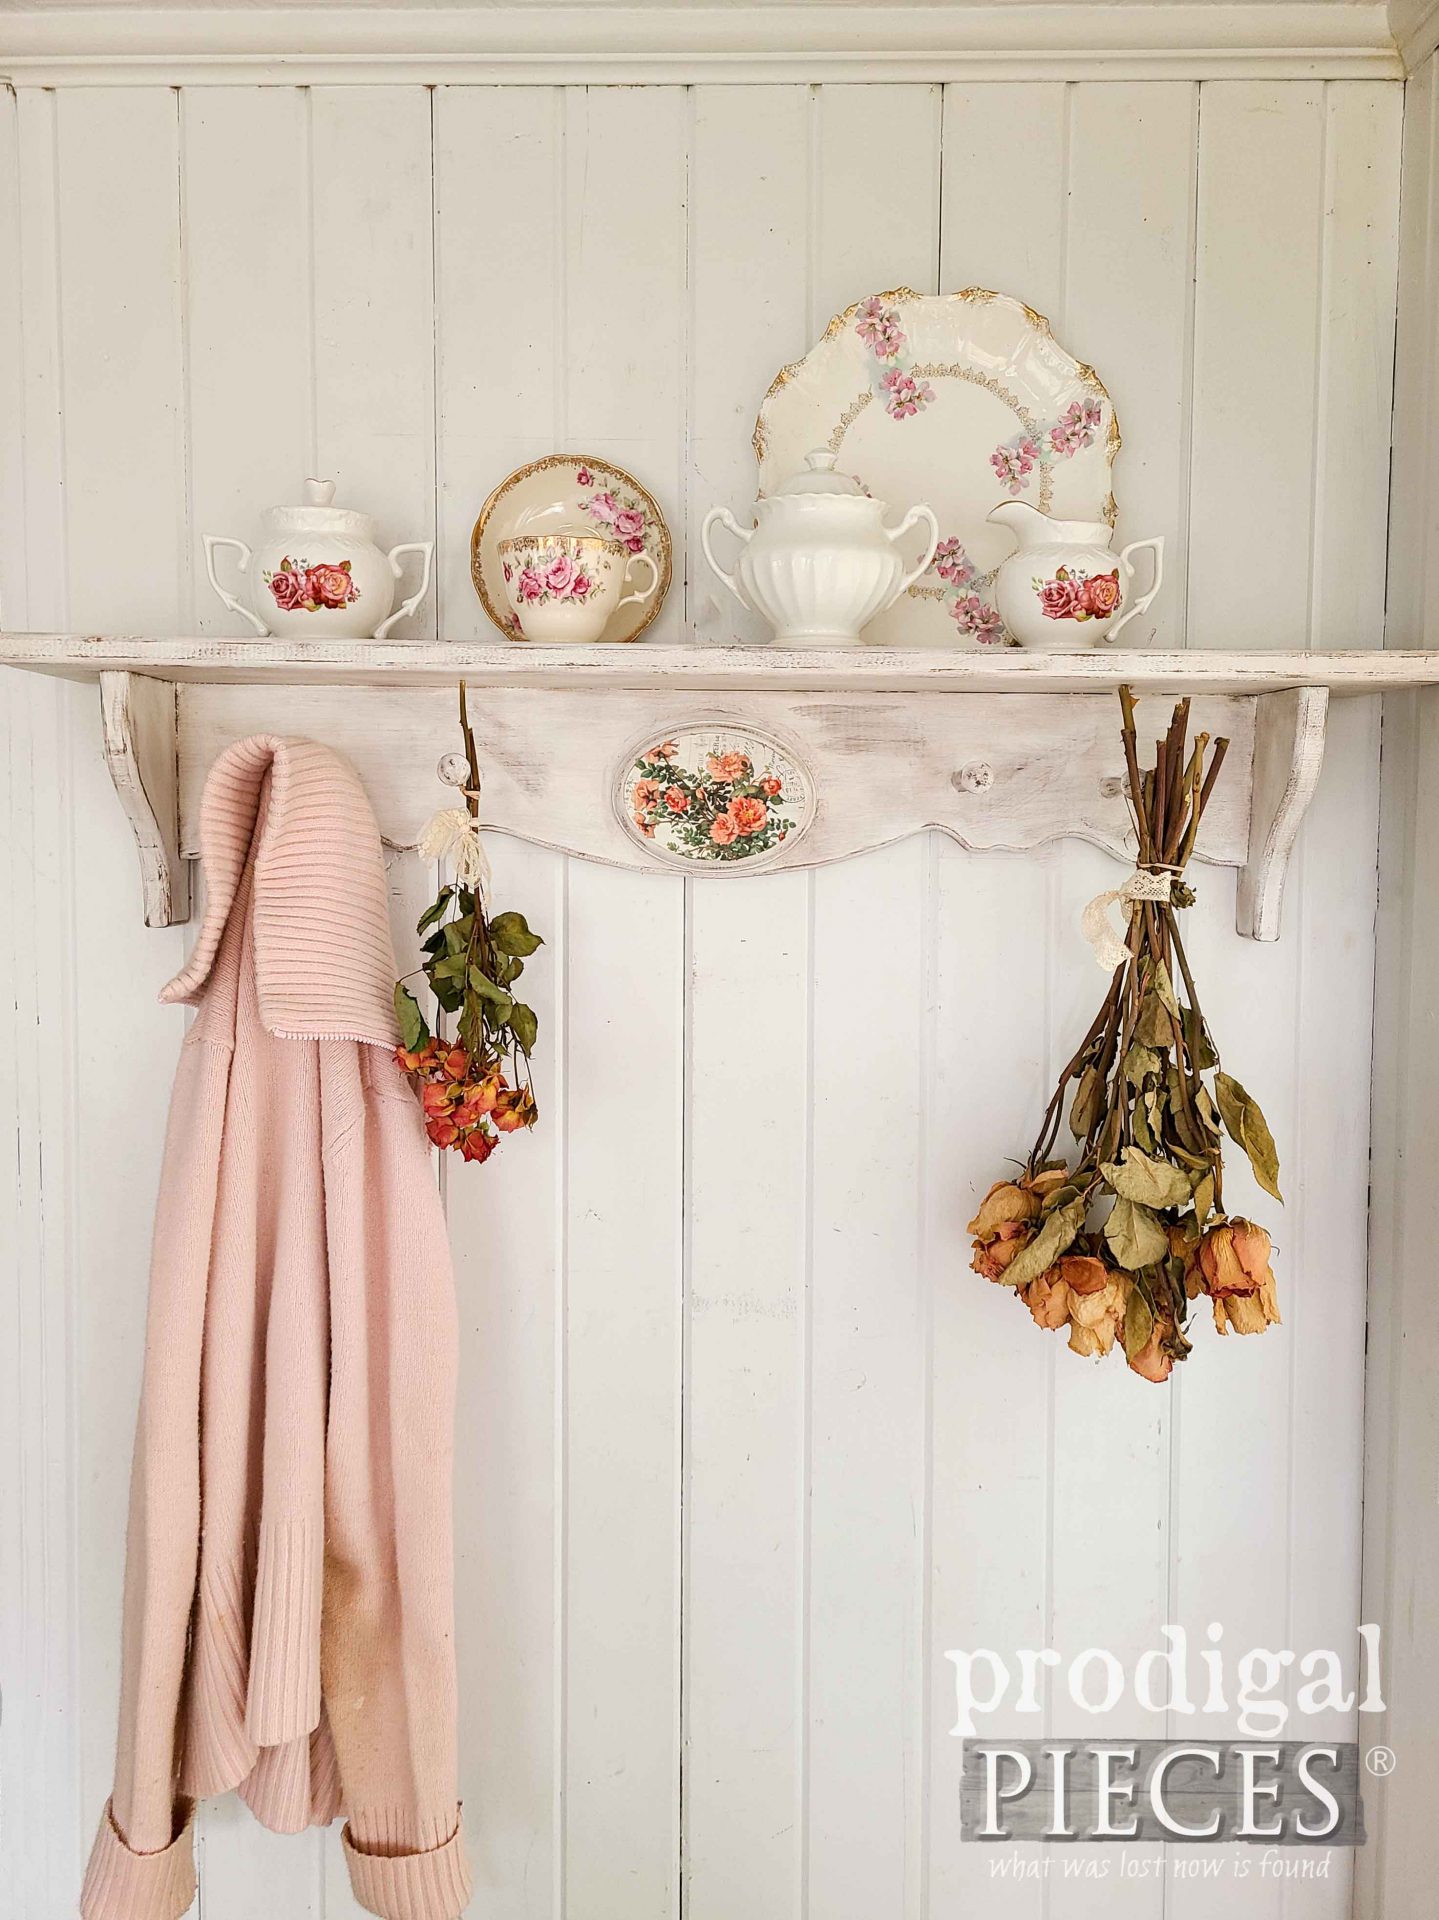 Beautiful Shabby Chic Shelf with Rose Accents for Thrifty Decor Makeovers by Larissa of Prodigal Pieces | prodigalpieces.com #prodigalpieces #shabbychic #vintage #rose #home #homedecor